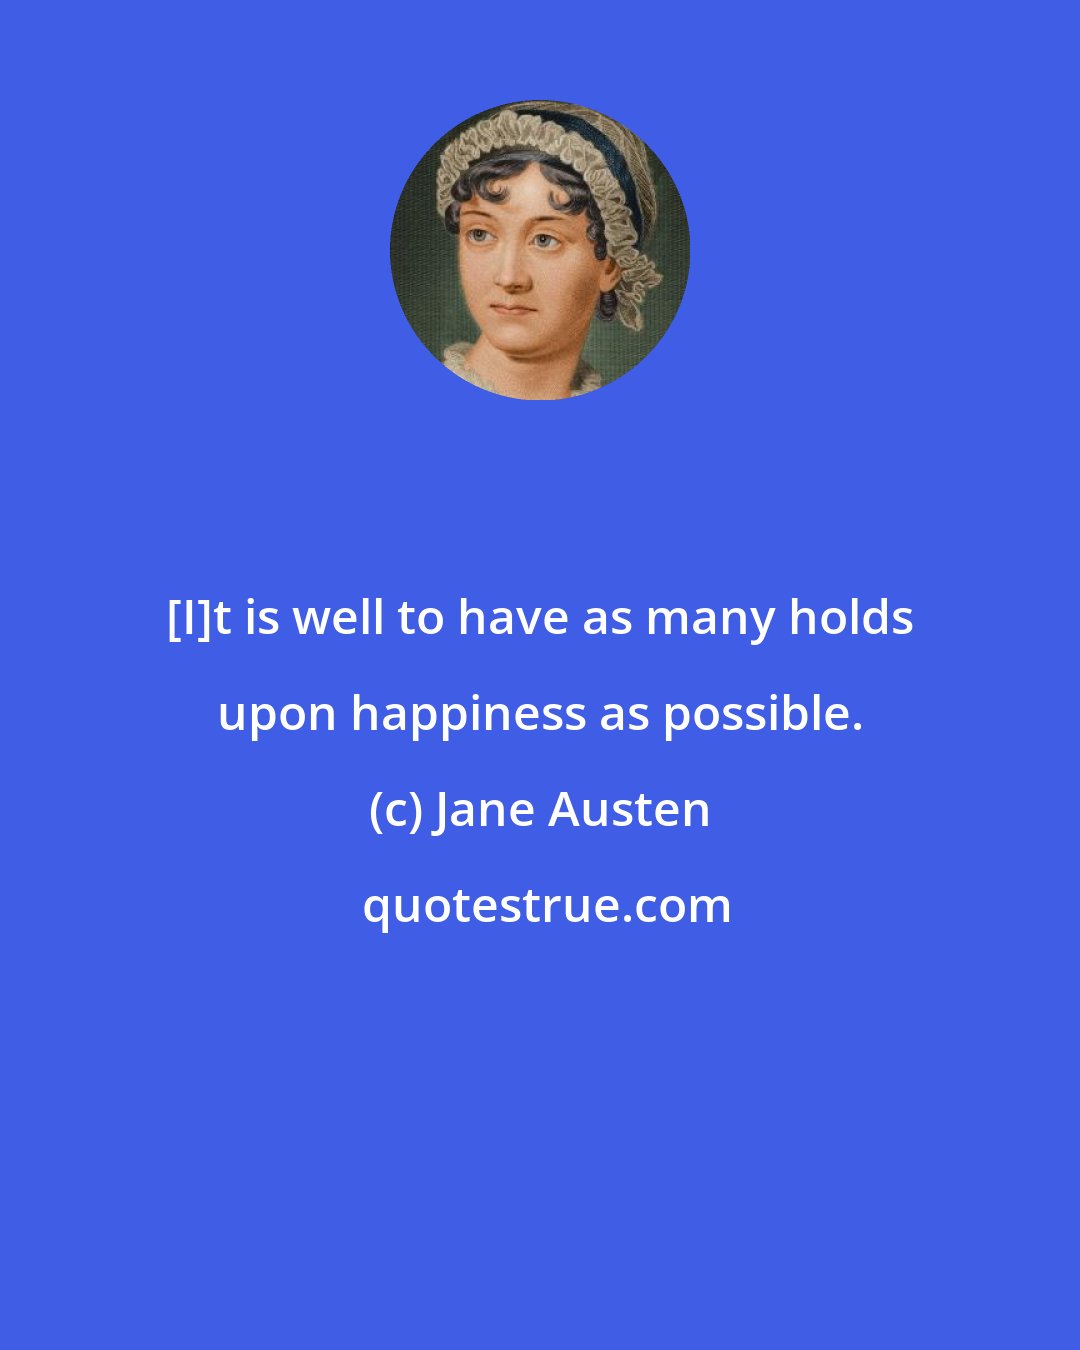 Jane Austen: [I]t is well to have as many holds upon happiness as possible.